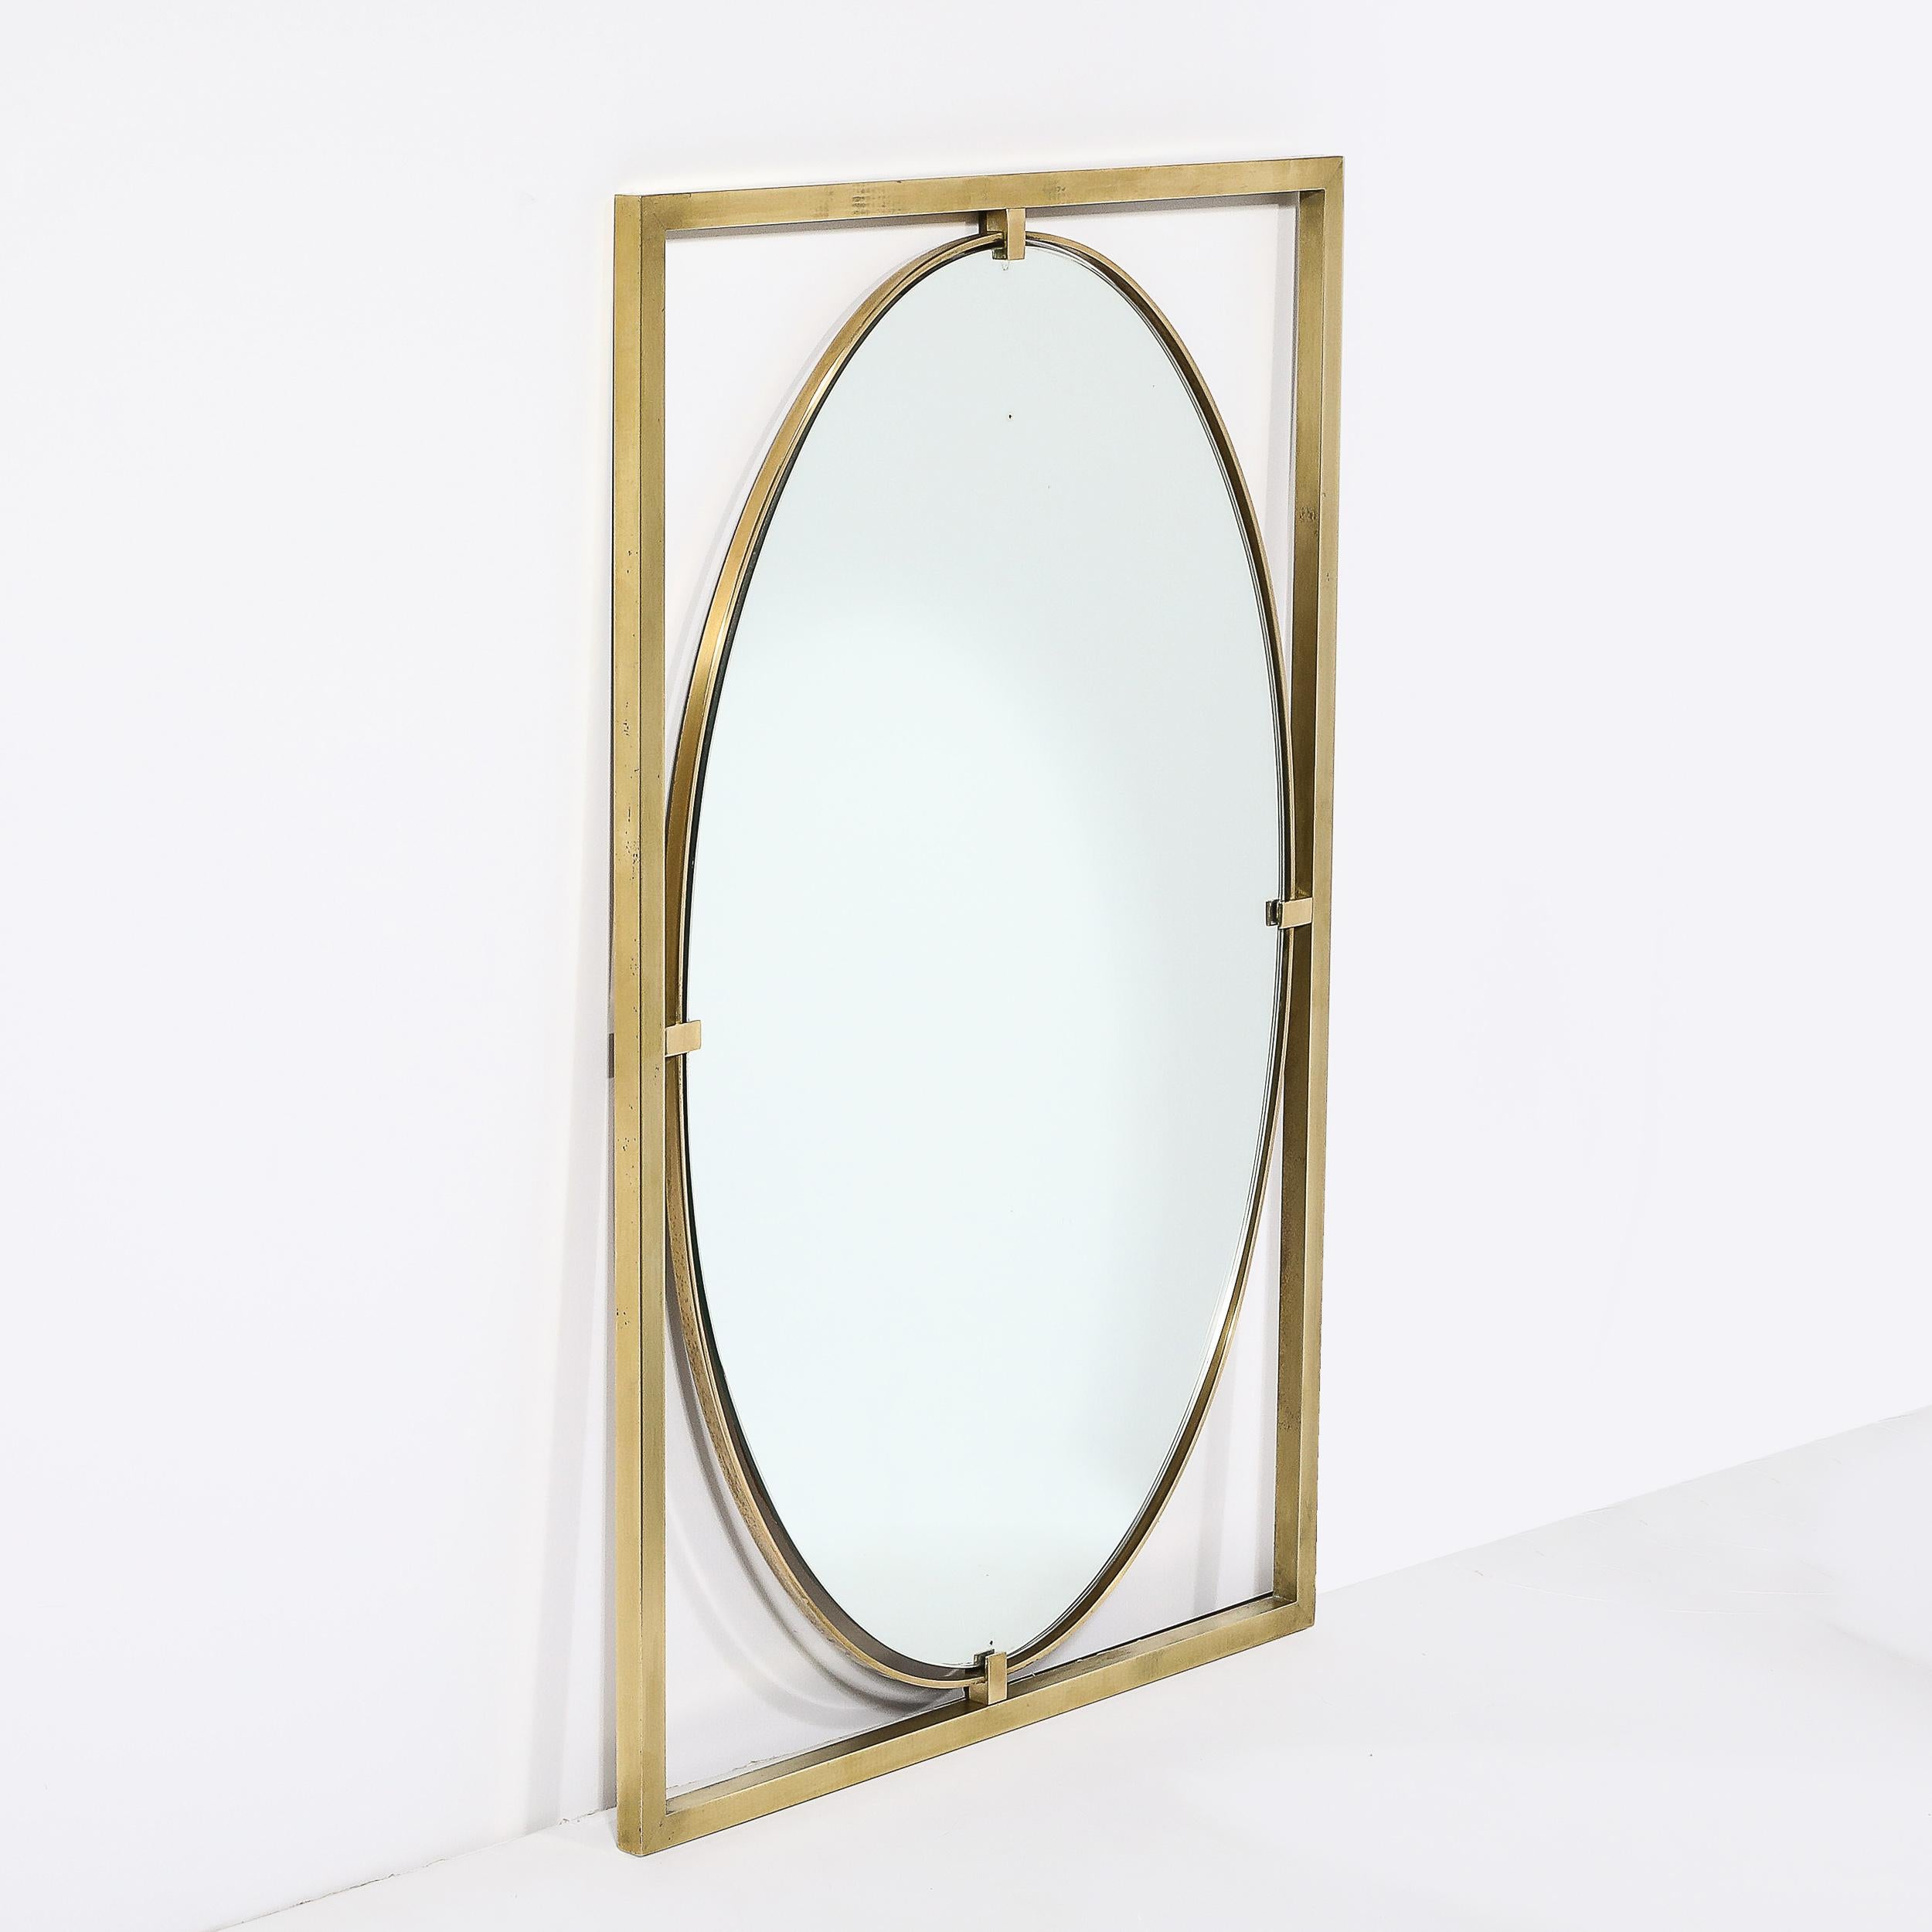 This materially excellent and well composed Mid-Century Modernist Oval Mirror W/Rectilinear Open Frame in Polished Brass is by John Widdicomb and originates from the United States, Circa 1960. Features an oval form mirror held in place by a brass